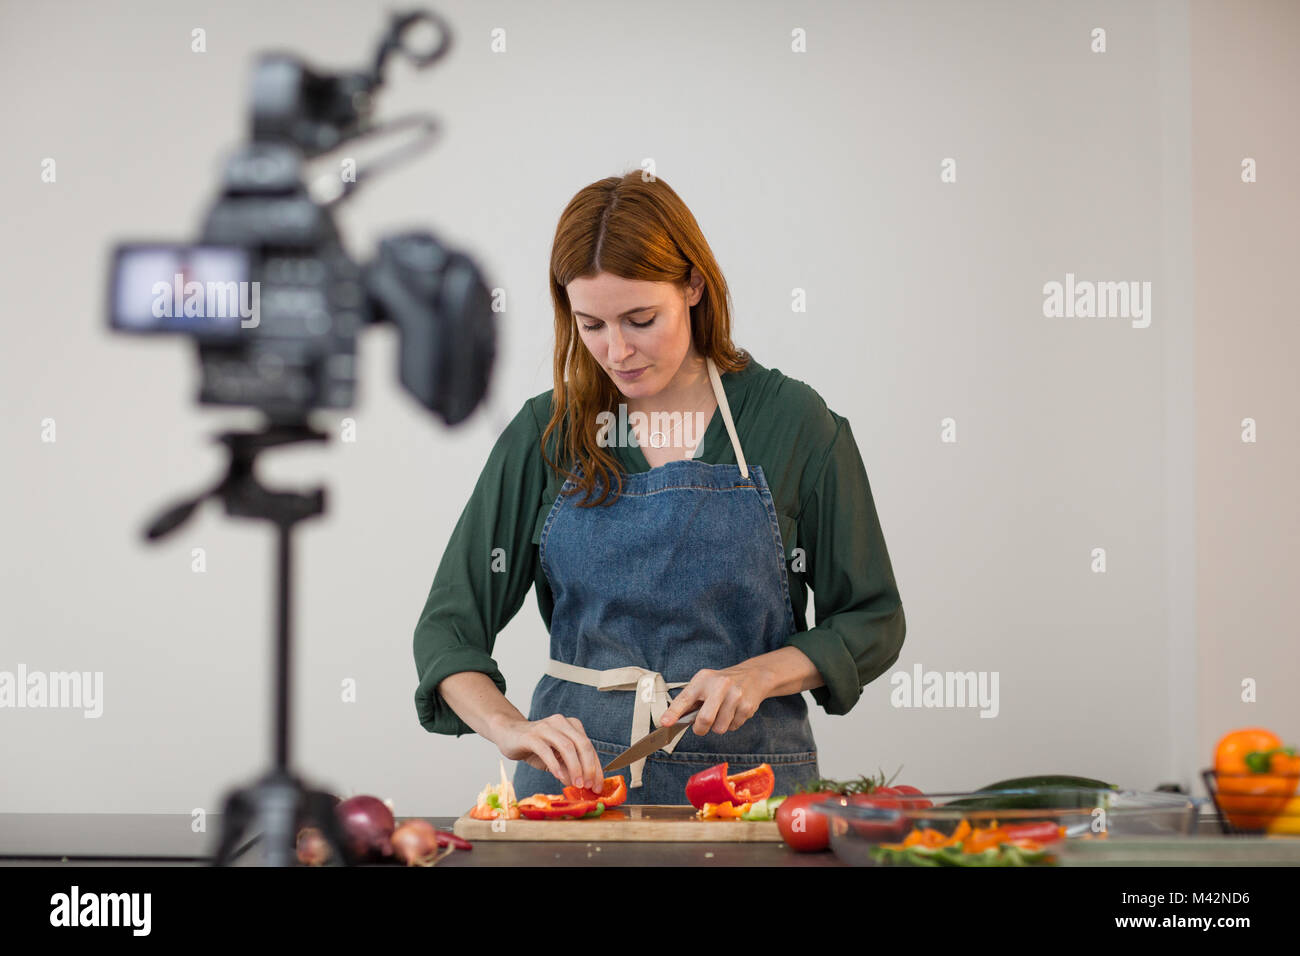 Adult female chef recording a video blog Stock Photo